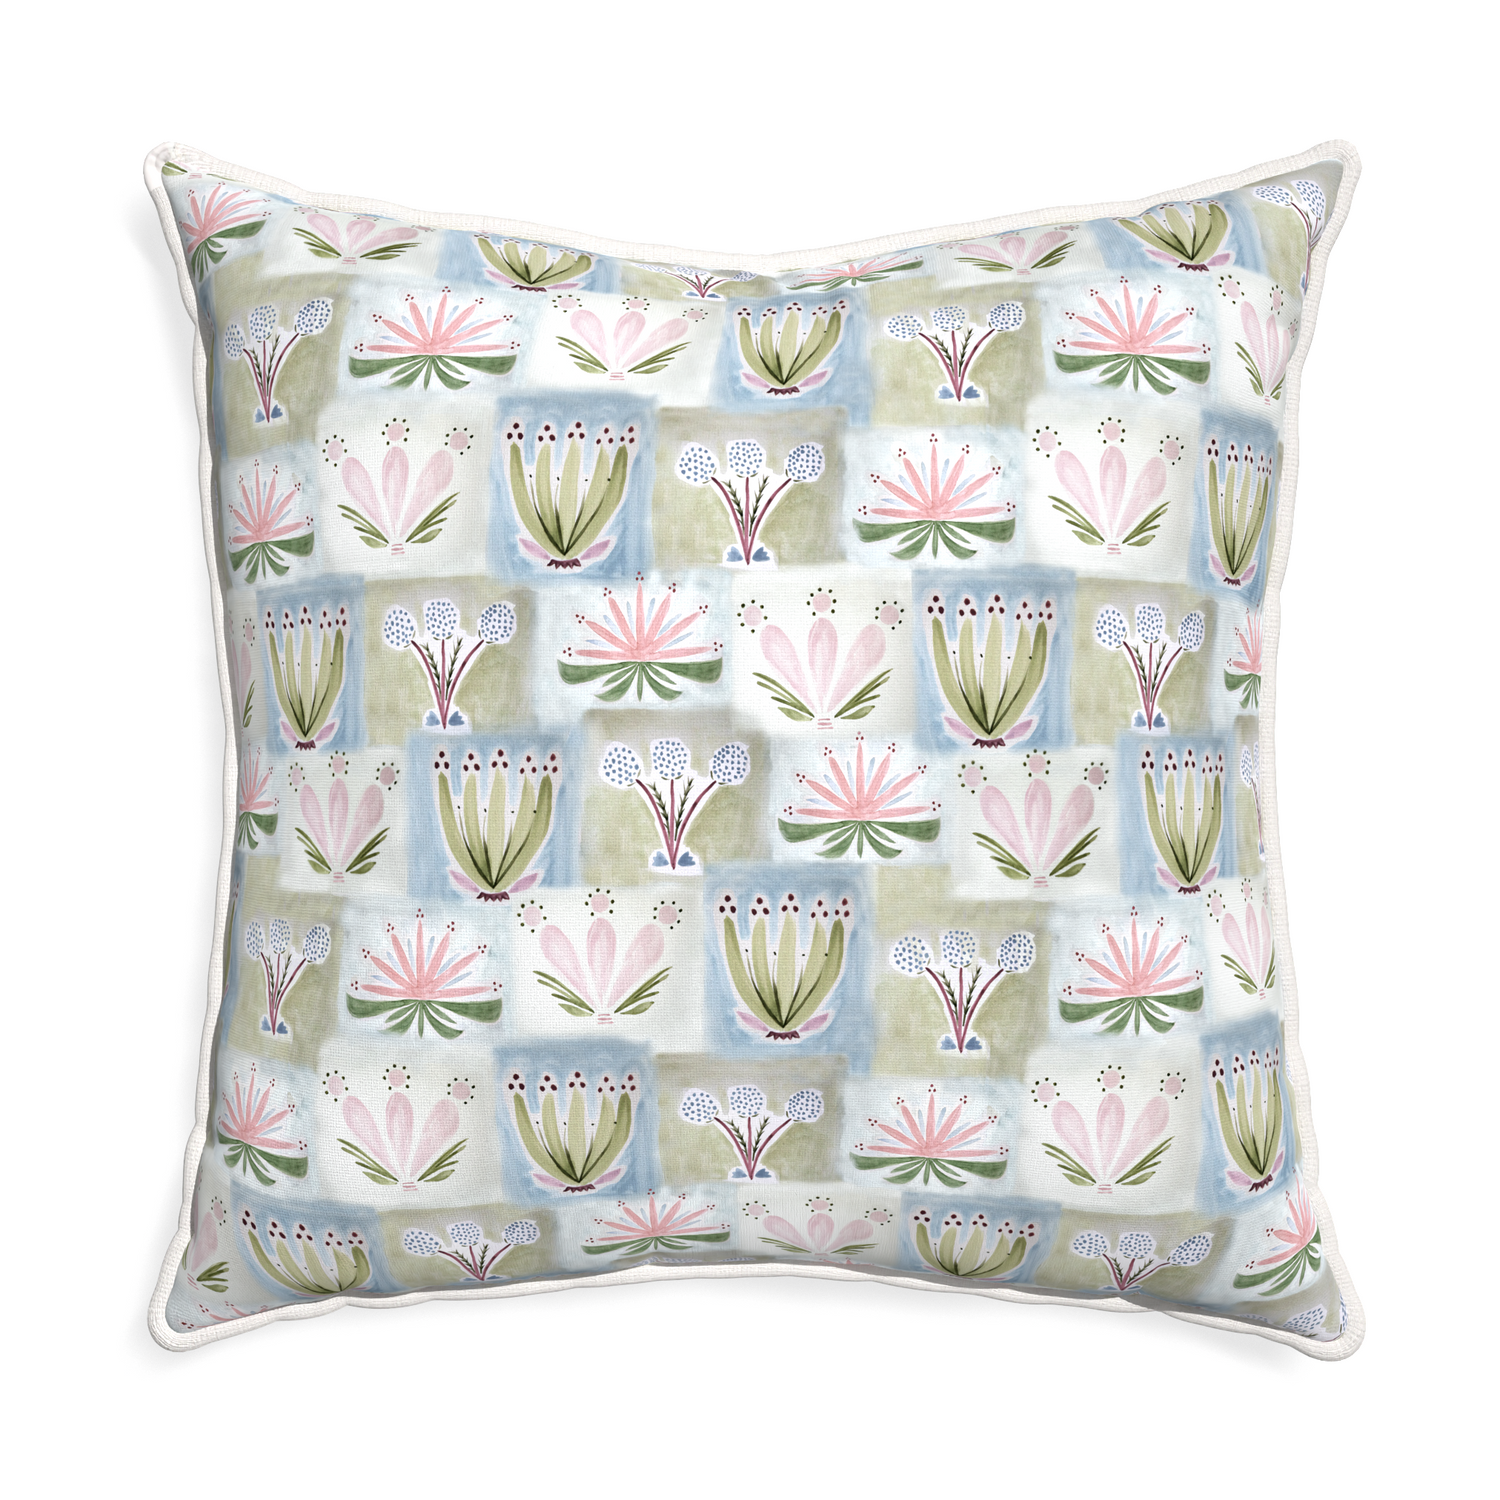 Euro-sham harper custom hand-painted floralpillow with snow piping on white background